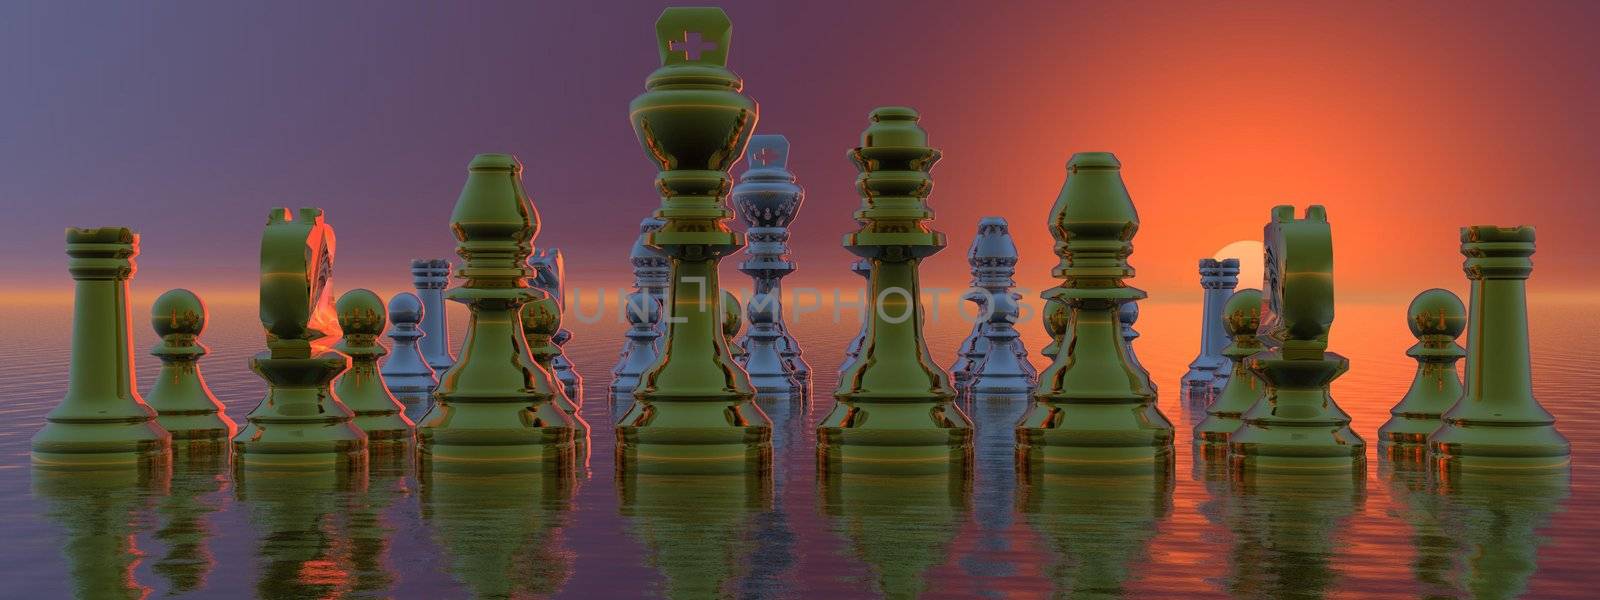 checkmate by mariephotos